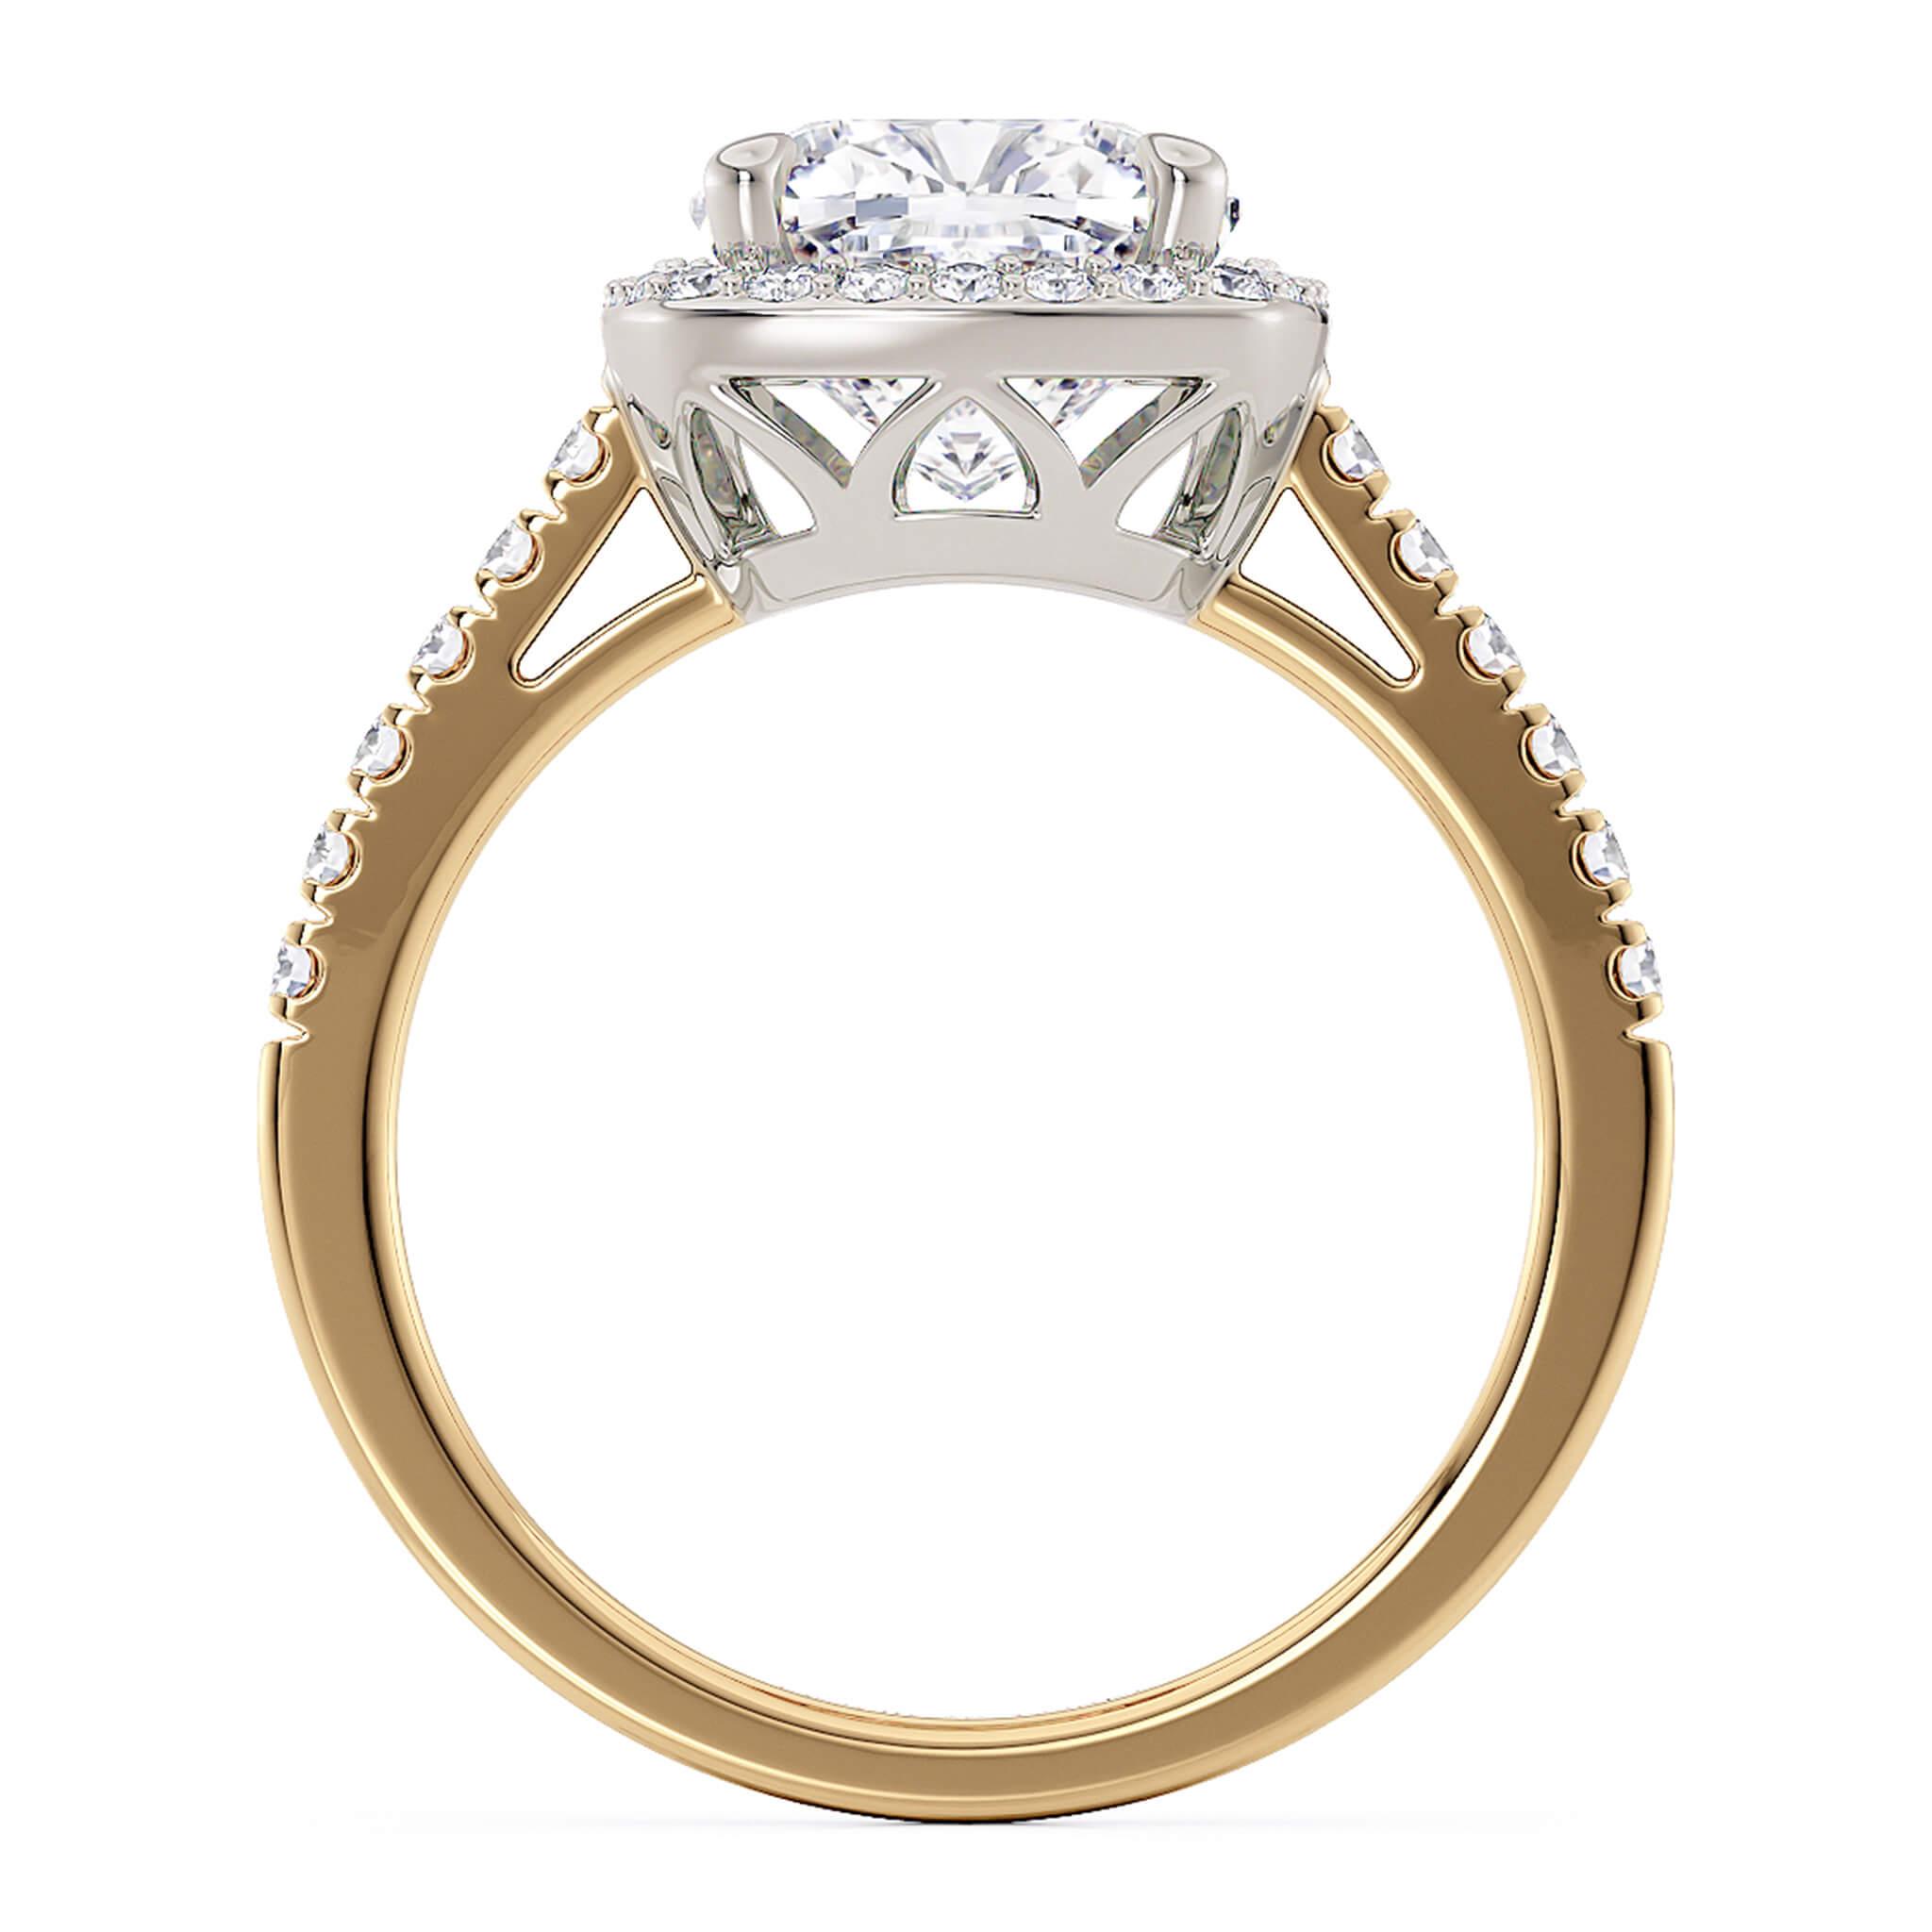 Side view of the Frankie cushion cut diamond halo ring.  Side view showing the beautiful open setting allowing light into centre diamond, allying it to shine bright. 